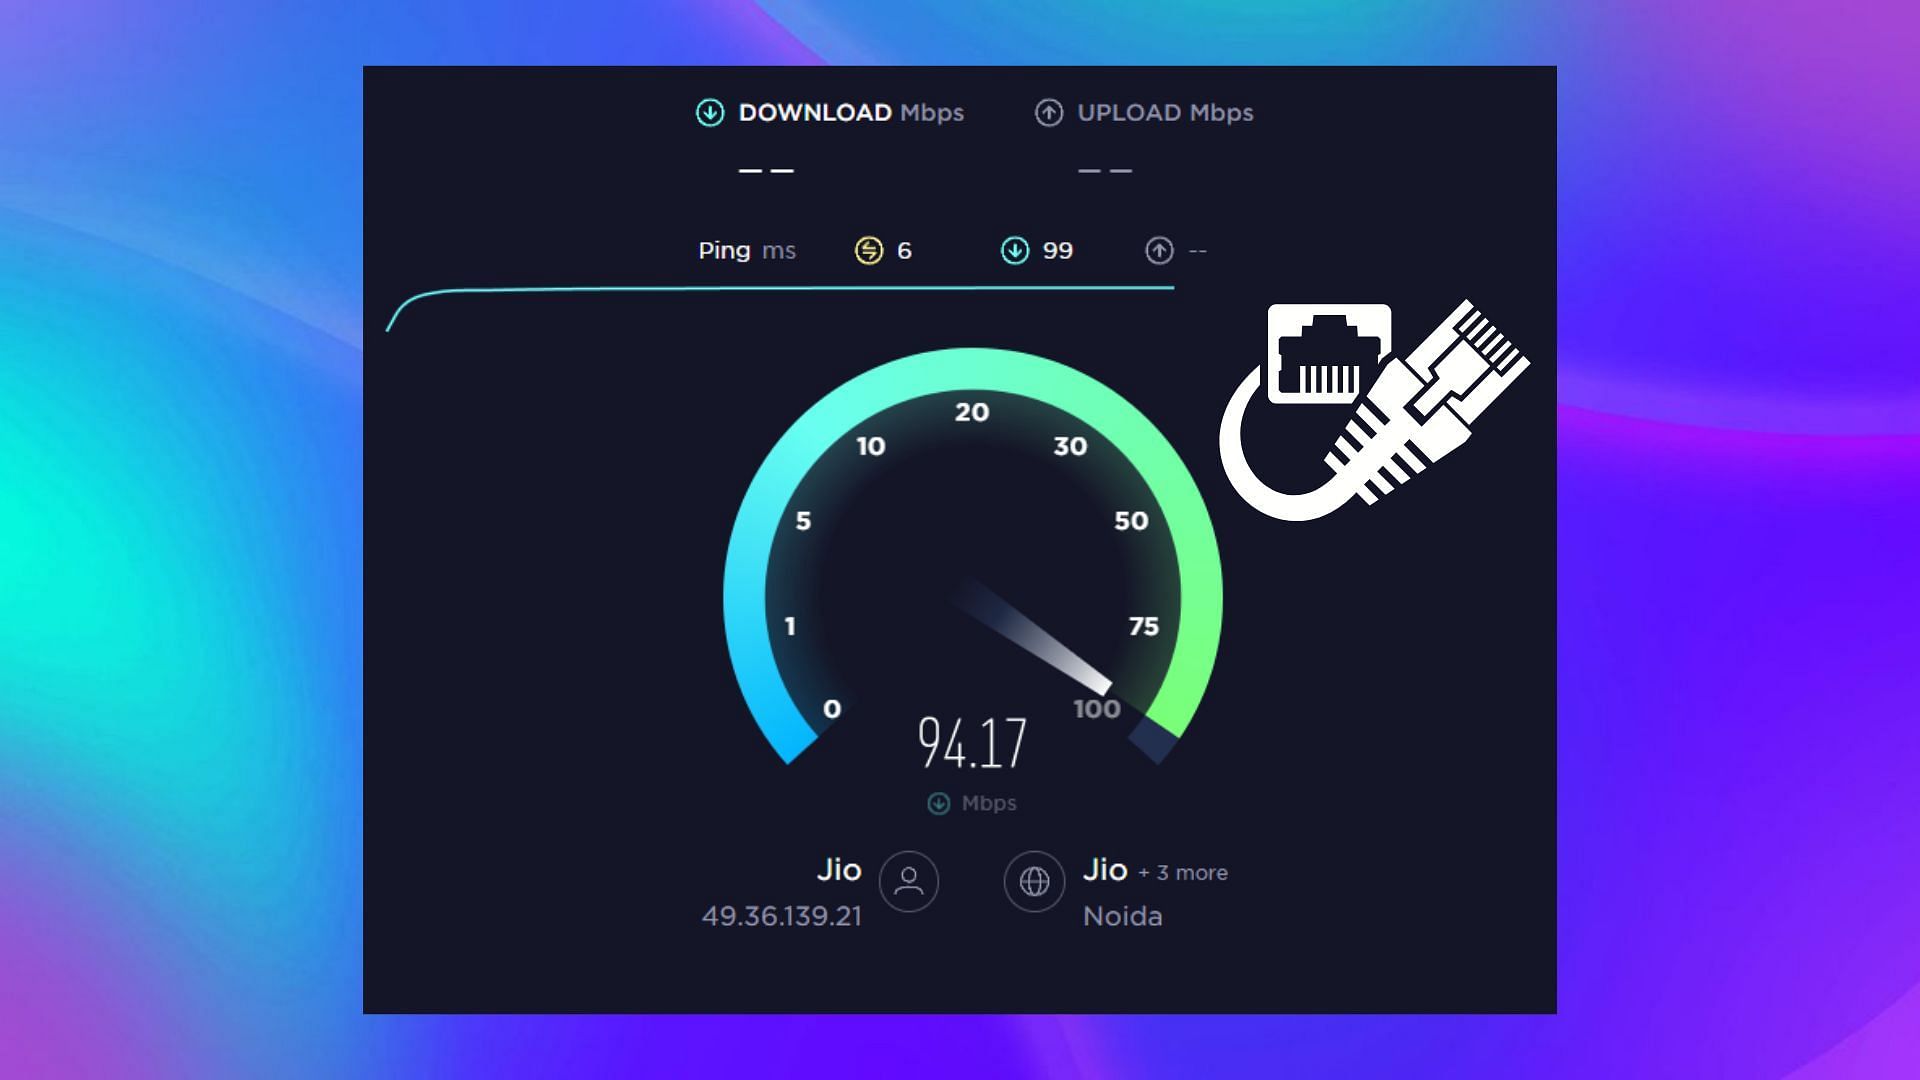 Internet speed on a wired connection (Image via Sportskeeda)